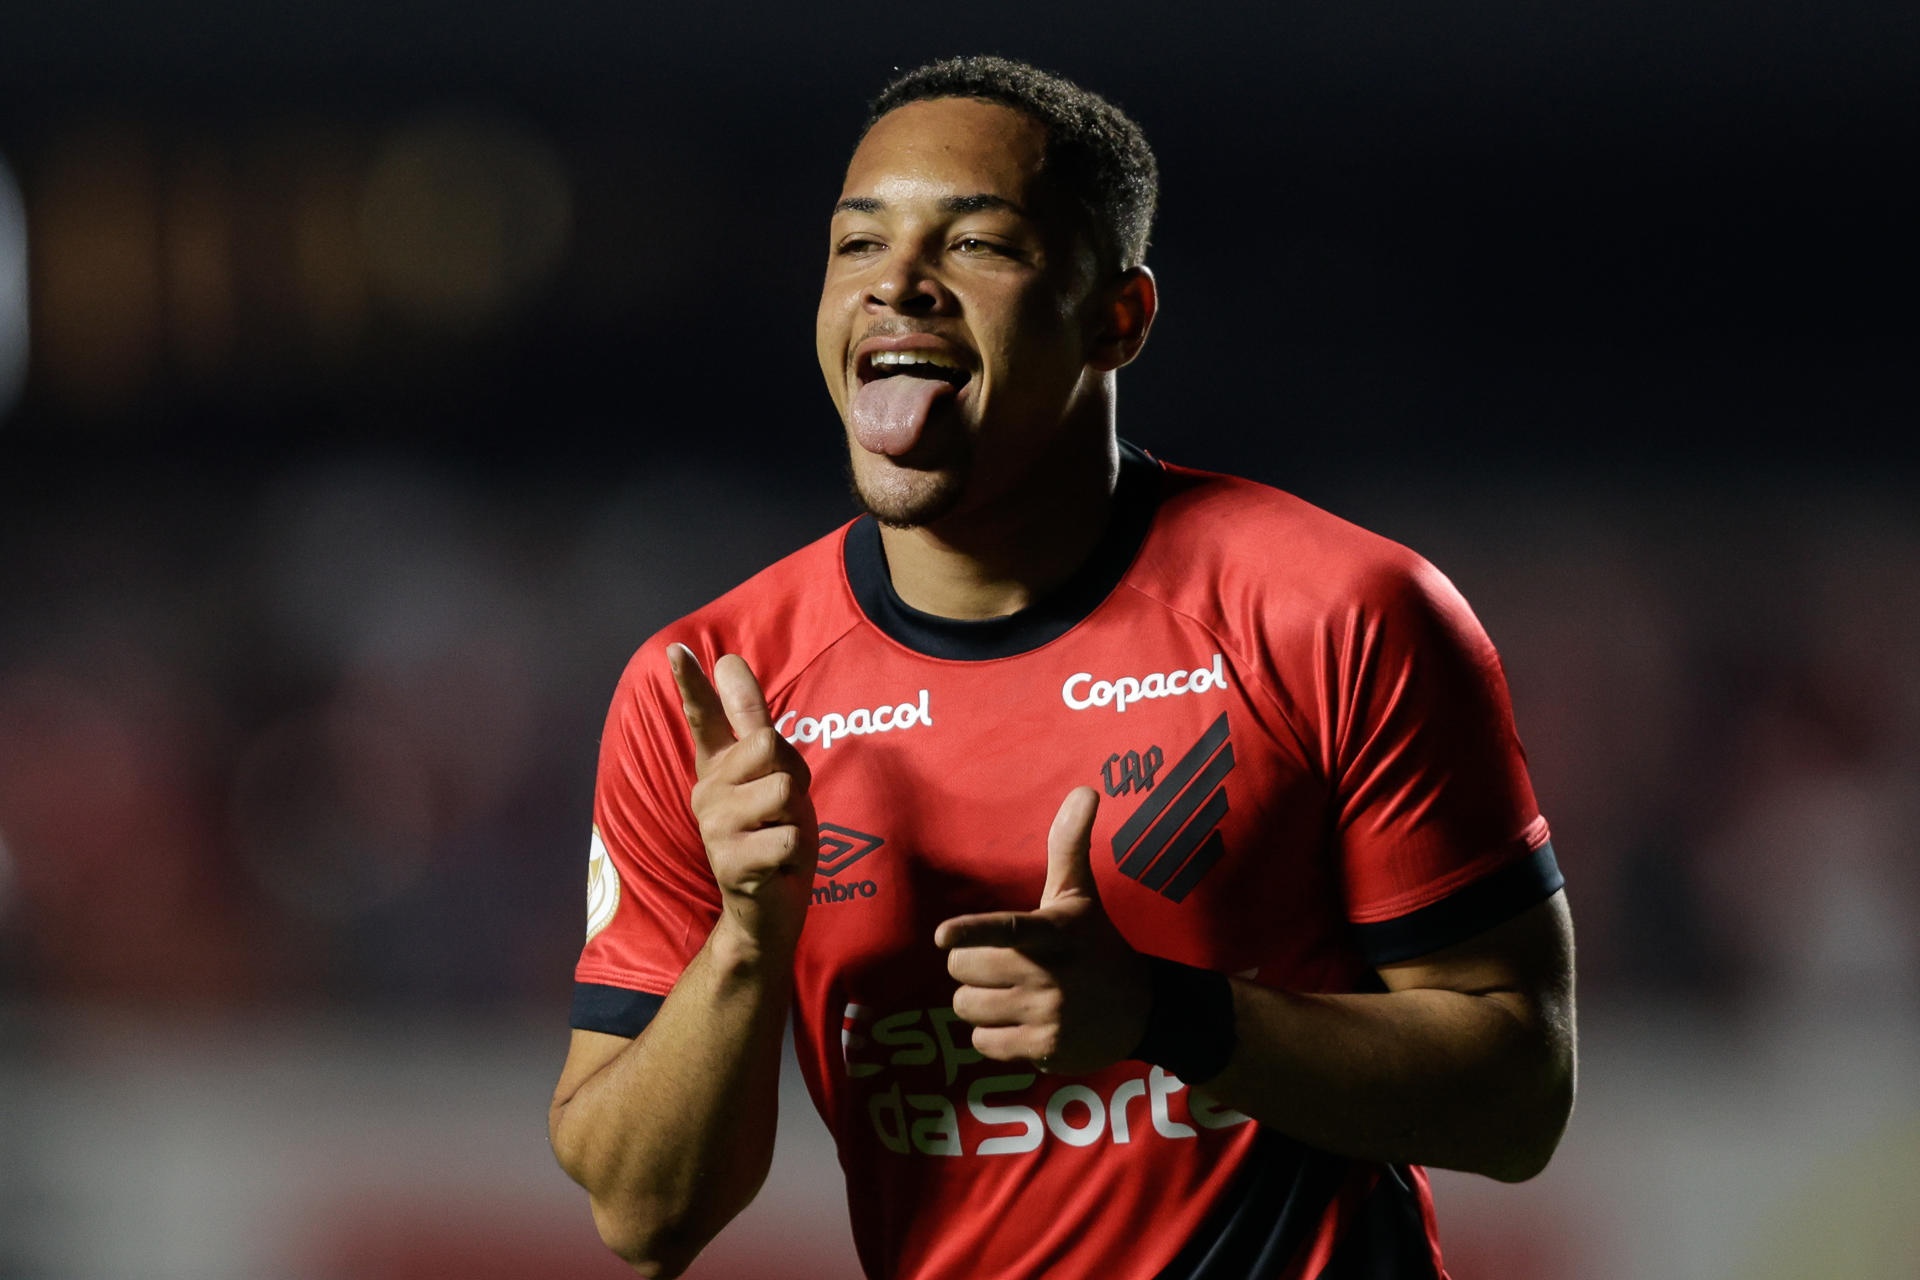 Vitor Roque opened the scoring in the Sao Paulo-Athletico Parananense match. He scored the first goal since the Catalan press announced an agreement in principle with FC Barcelona, with whom he would sign until 2028. However, the match ended in a 2-1 defeat for his team.